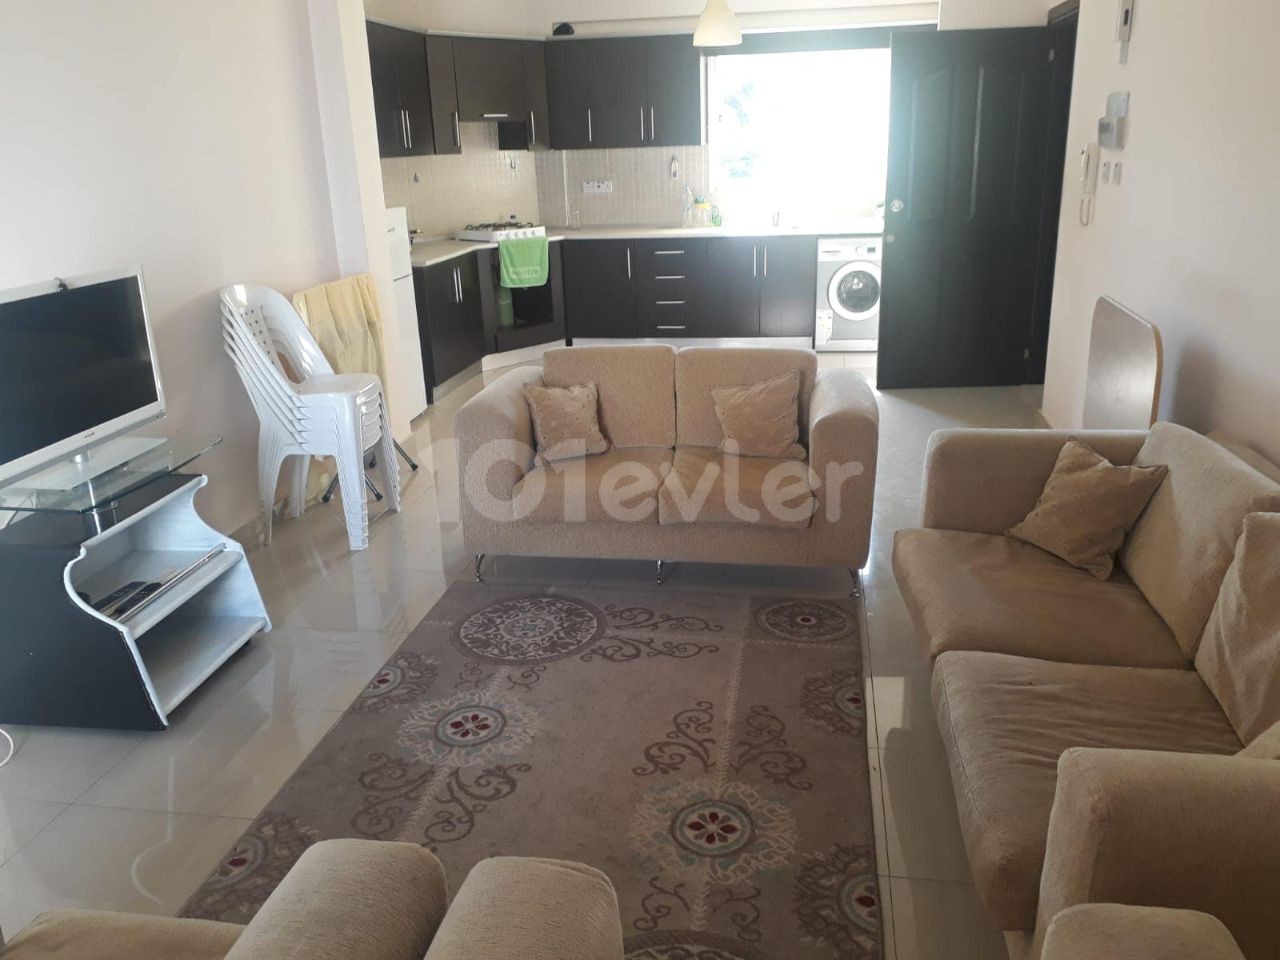 - 2+1 FURNISHED FLAT 2 Minutes from Gönyeli Region School Buses and Markets.